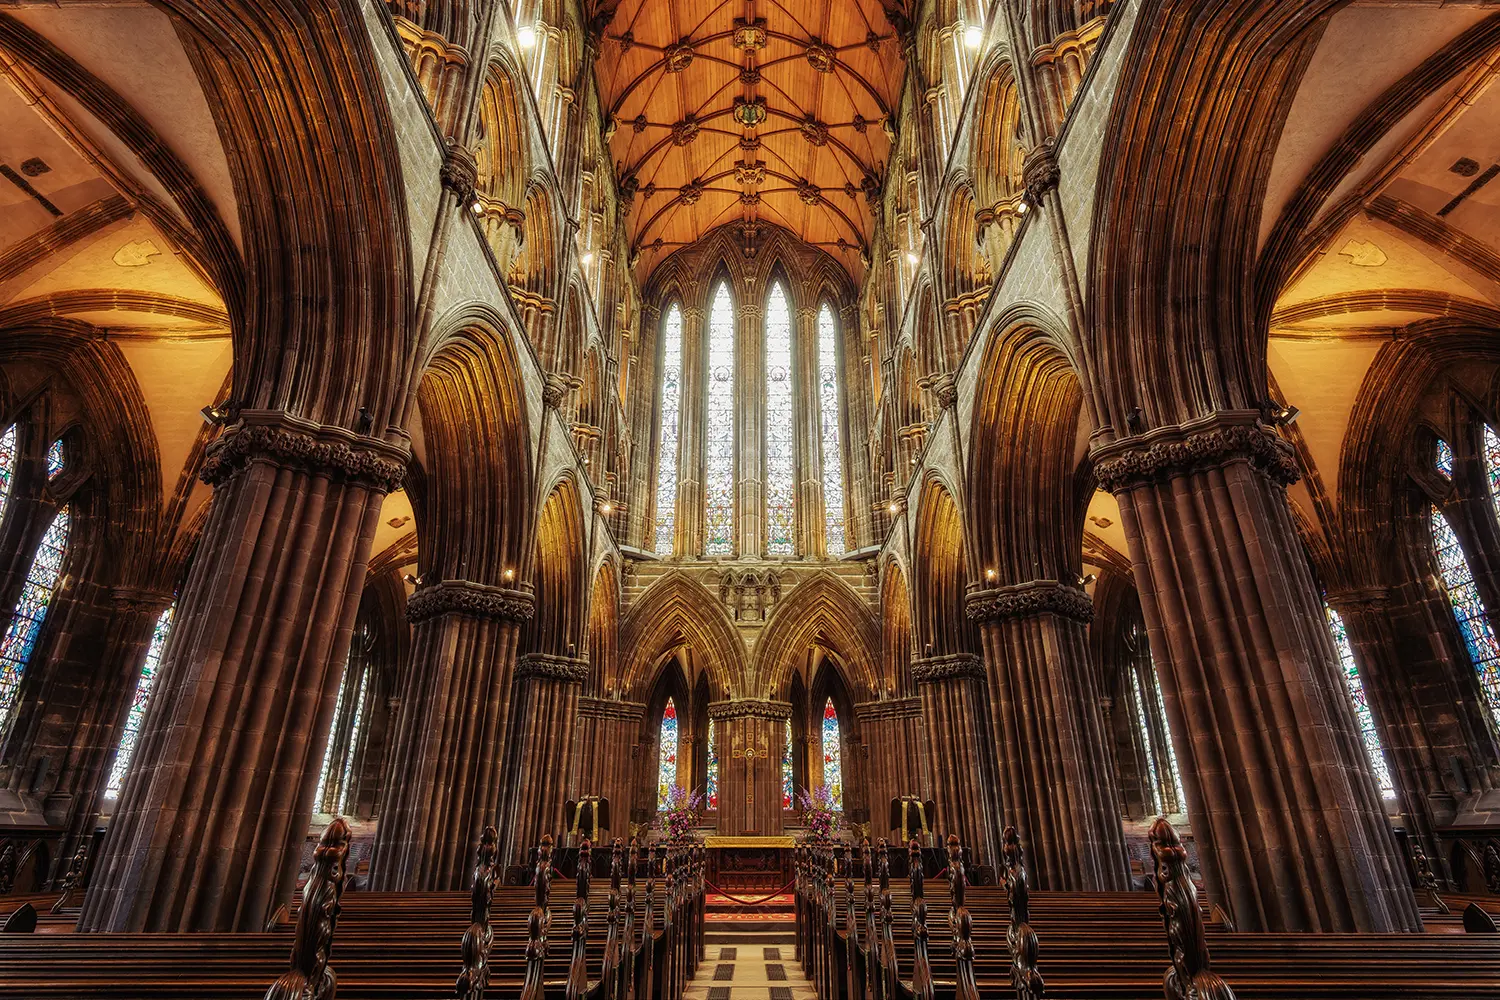 Interior of the Glasgow Cathedral